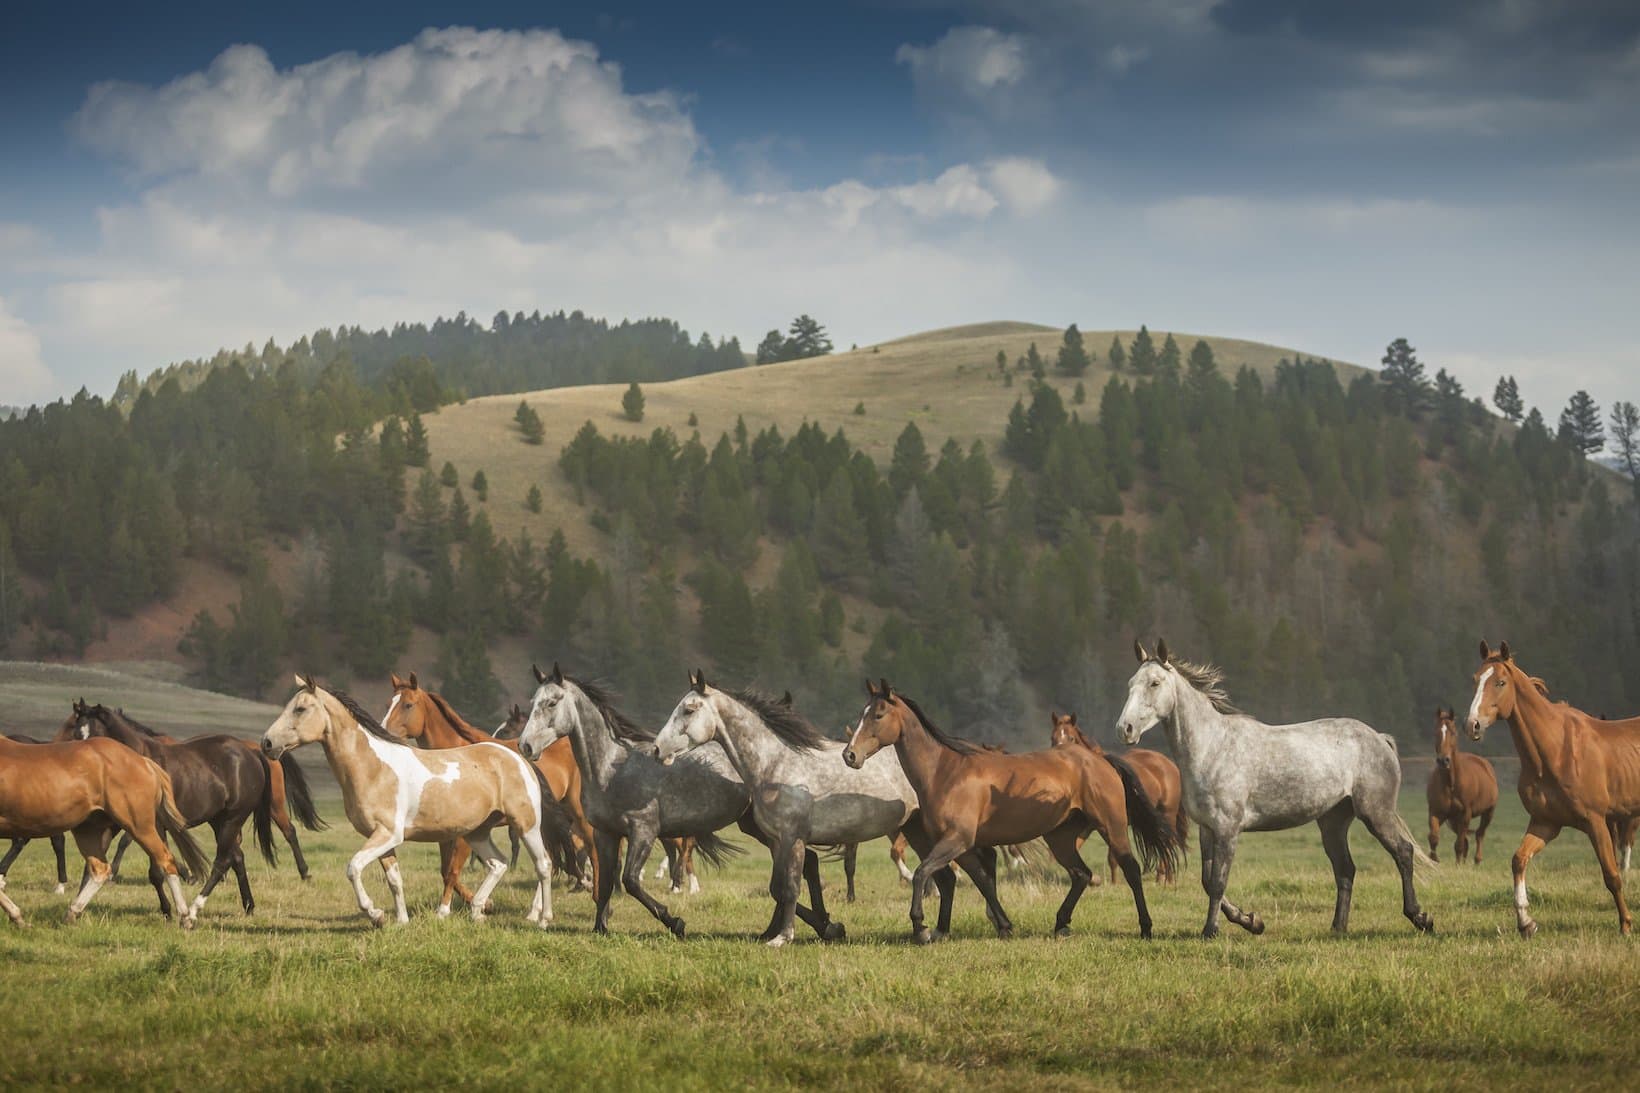 Horseback riding is one bucket list adventure you can have at The Ranch at Rock Creek